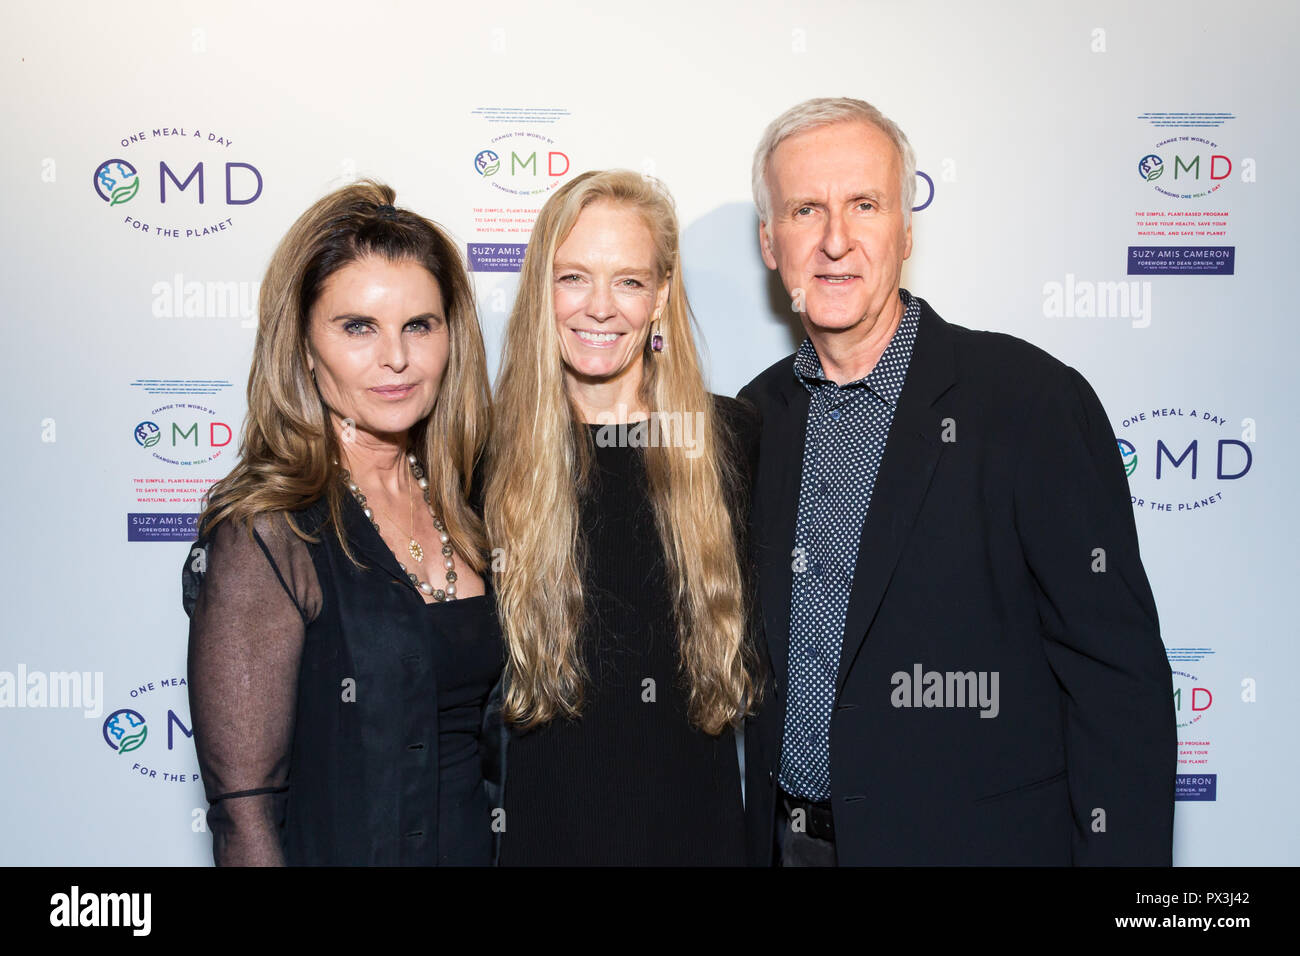 Los Angeles, USA. 18th October, 2018. Maria Shriver (left), Suzy Amis Cameron (center) James Cameron (right) attend the launch of Suzy Amis Cameron's  book 'OMD: The Simple, Plant-Based Program to Save Your Health, Save Your Waistline, and Save the Planet' hosted by James Cameron in Crossroads restaurant. Credit: Vladimir Yazev/Alamy Live News. Stock Photo